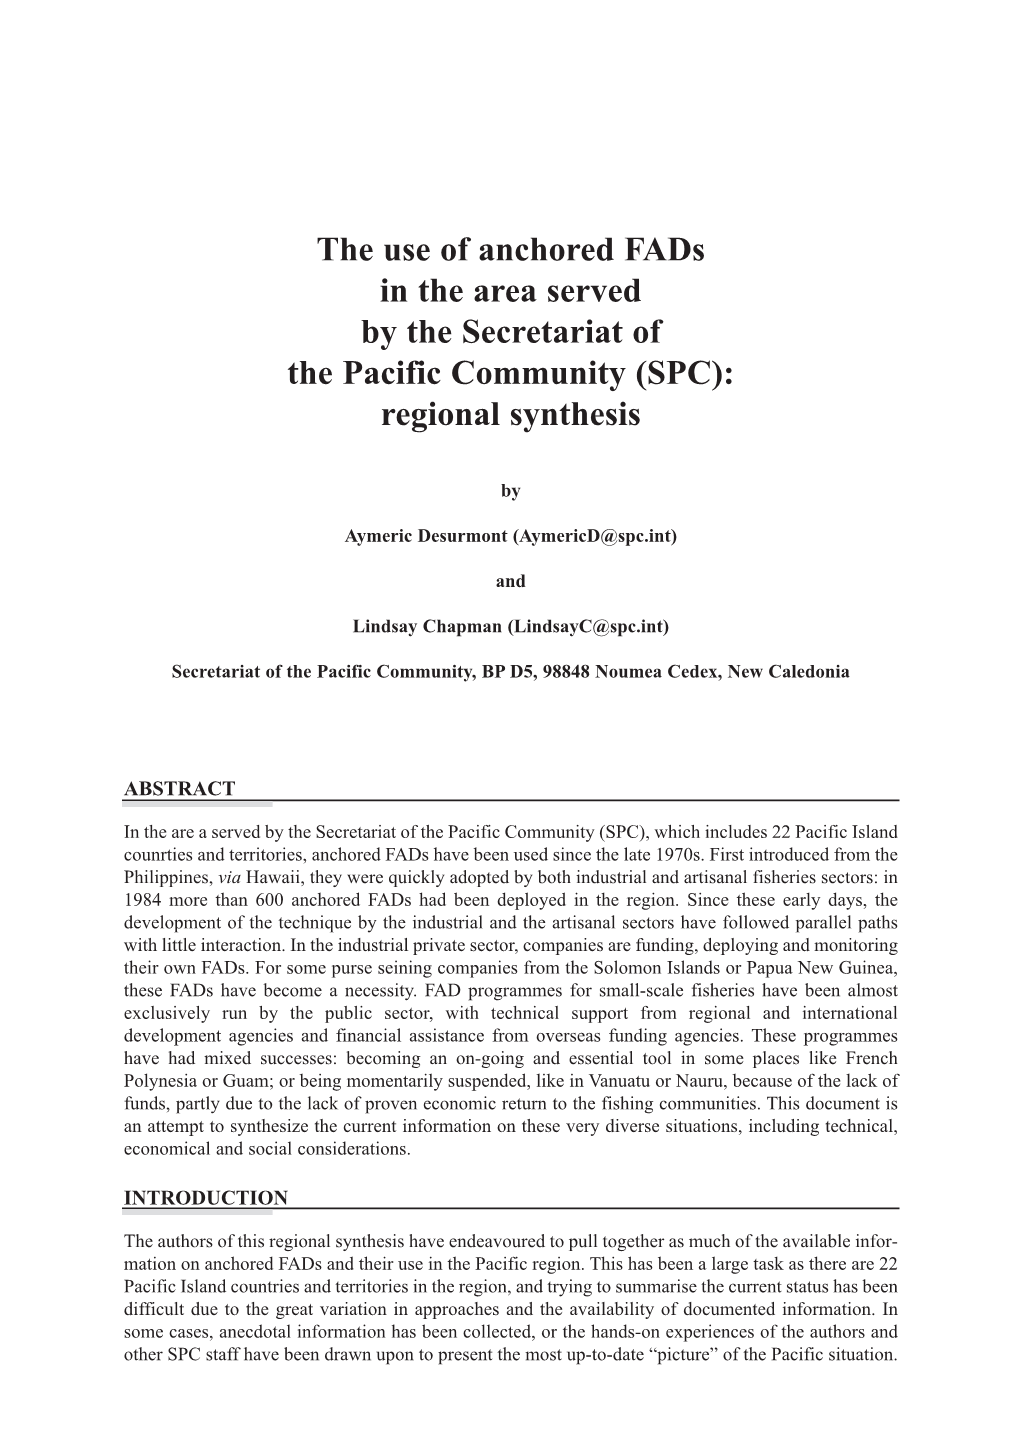 The Use of Anchored Fads in the Area Served by the Secretariat of the Pacific Community (SPC): Regional Synthesis